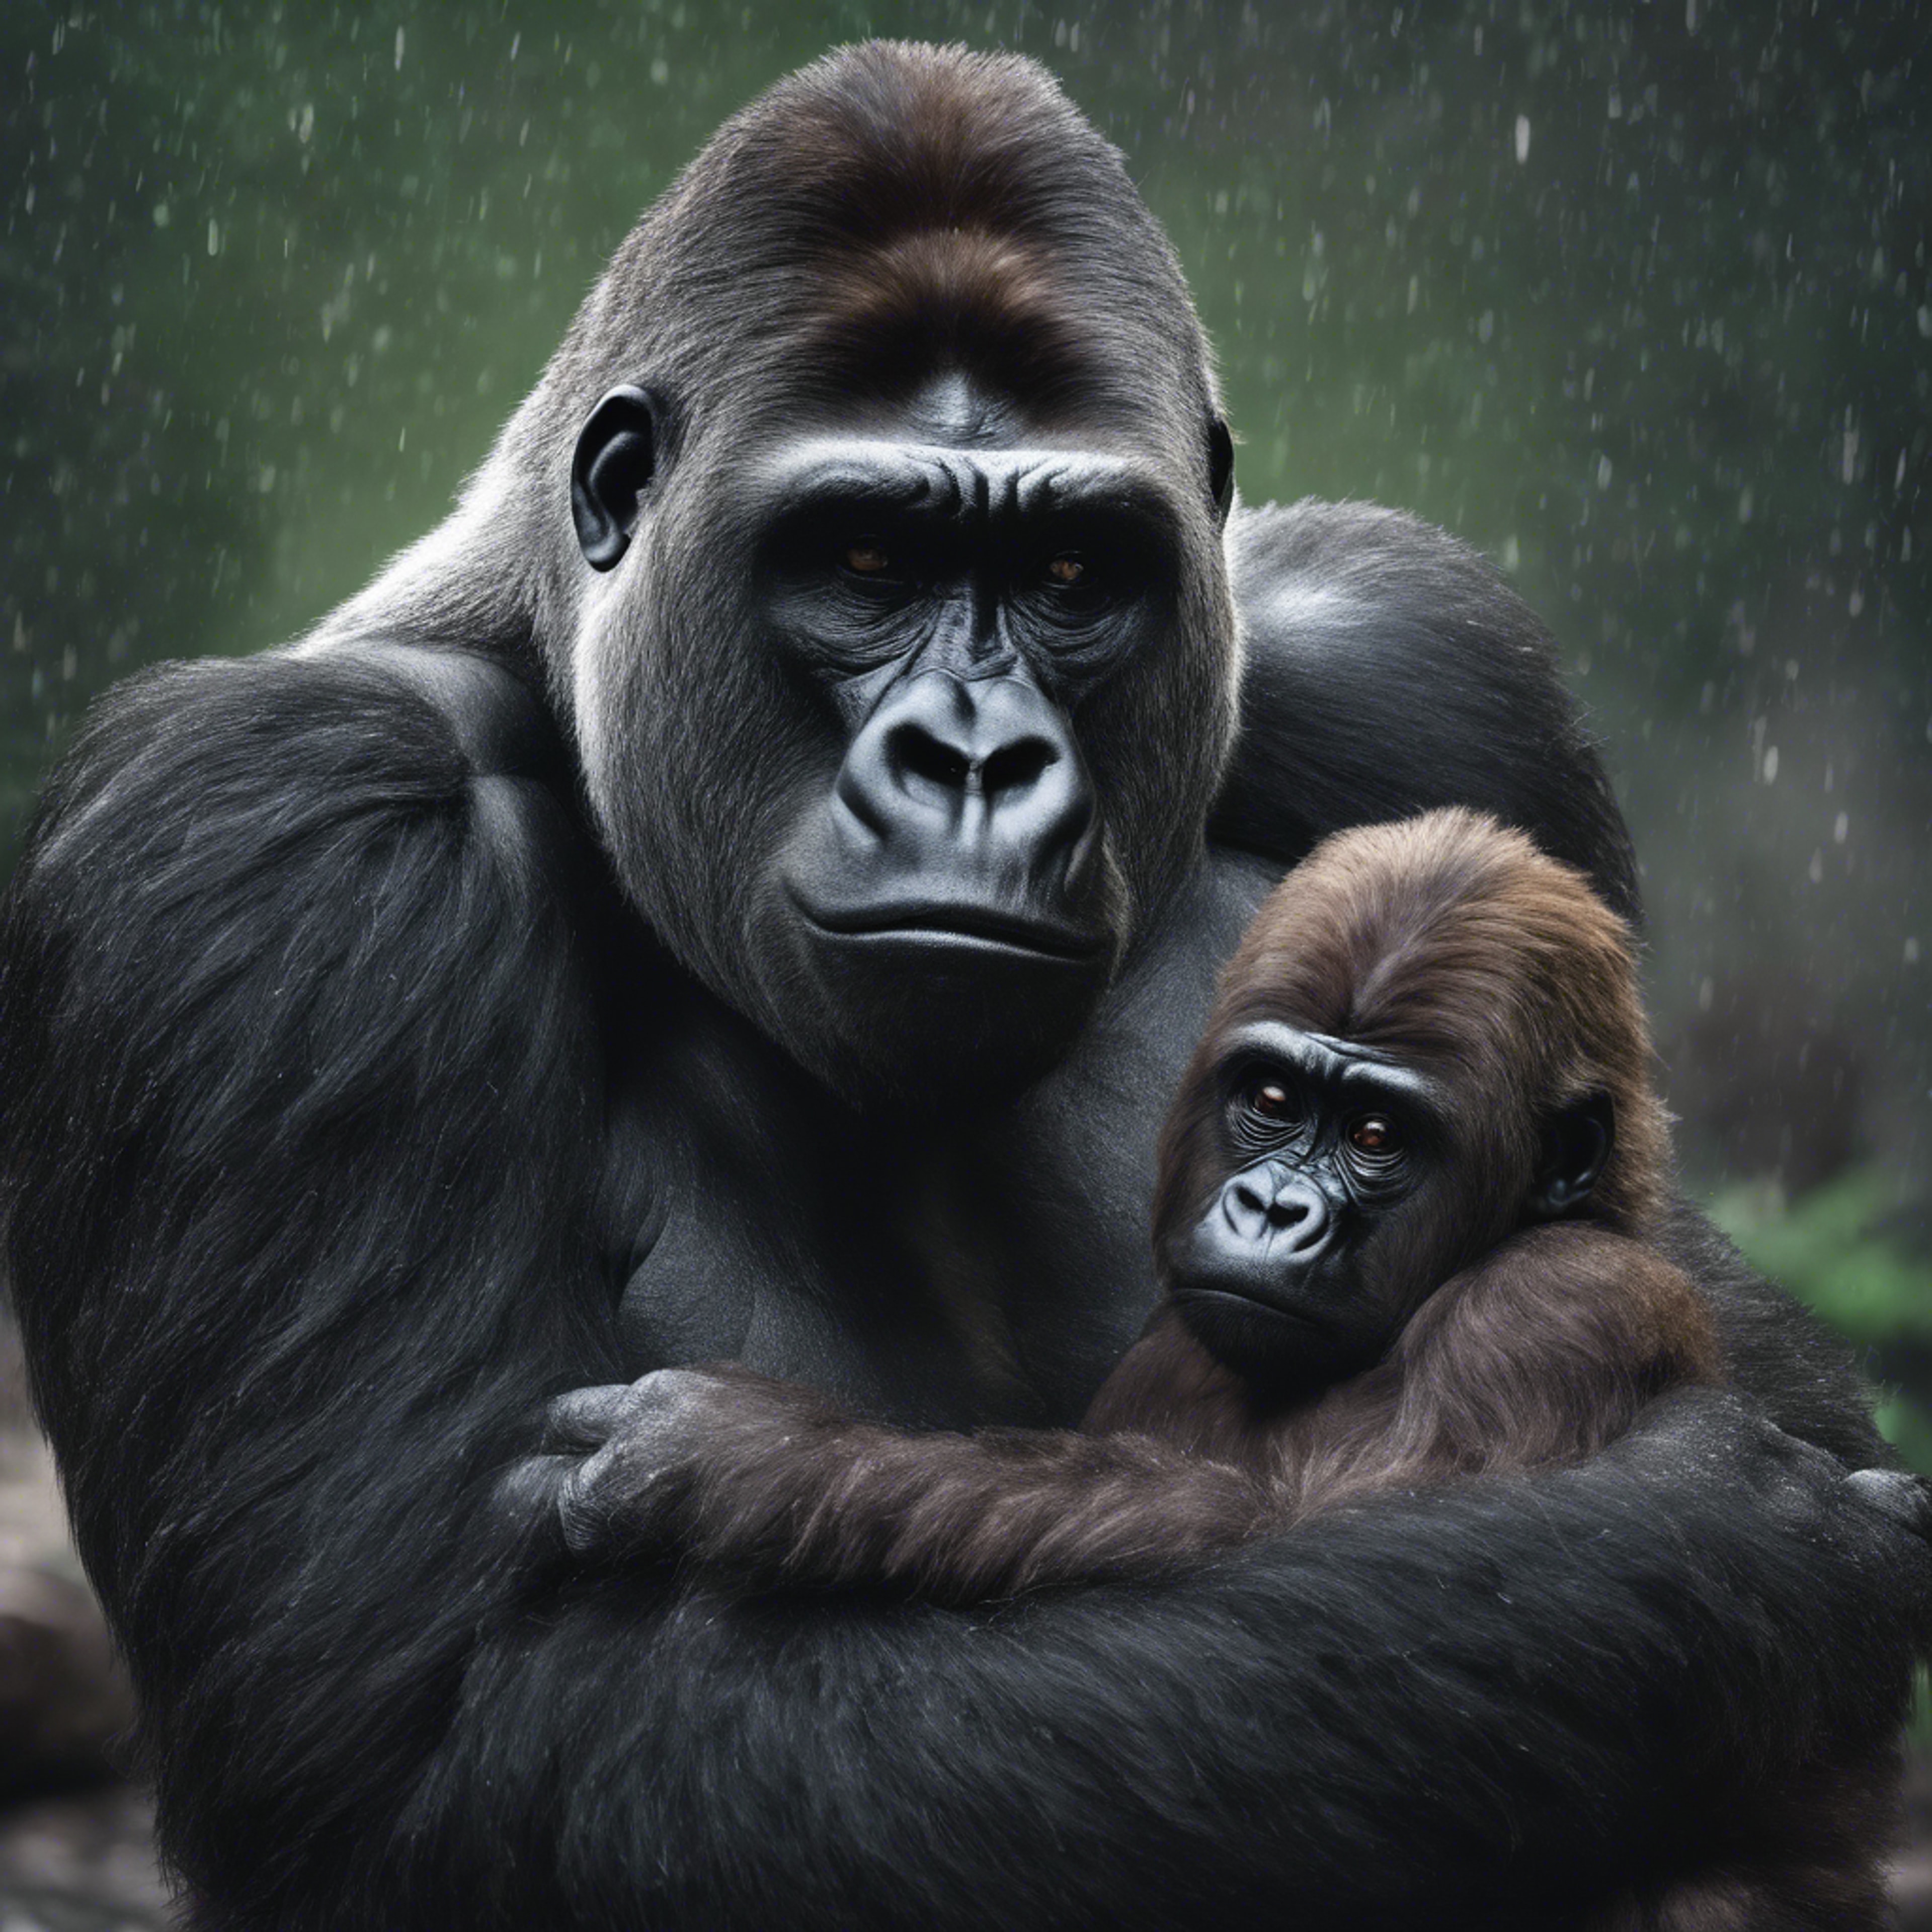 A soft, sensitive study of a gorilla father gently comforting his scared offspring during a thunderstorm. Шпалери[6d897e1fa87d4d60b202]